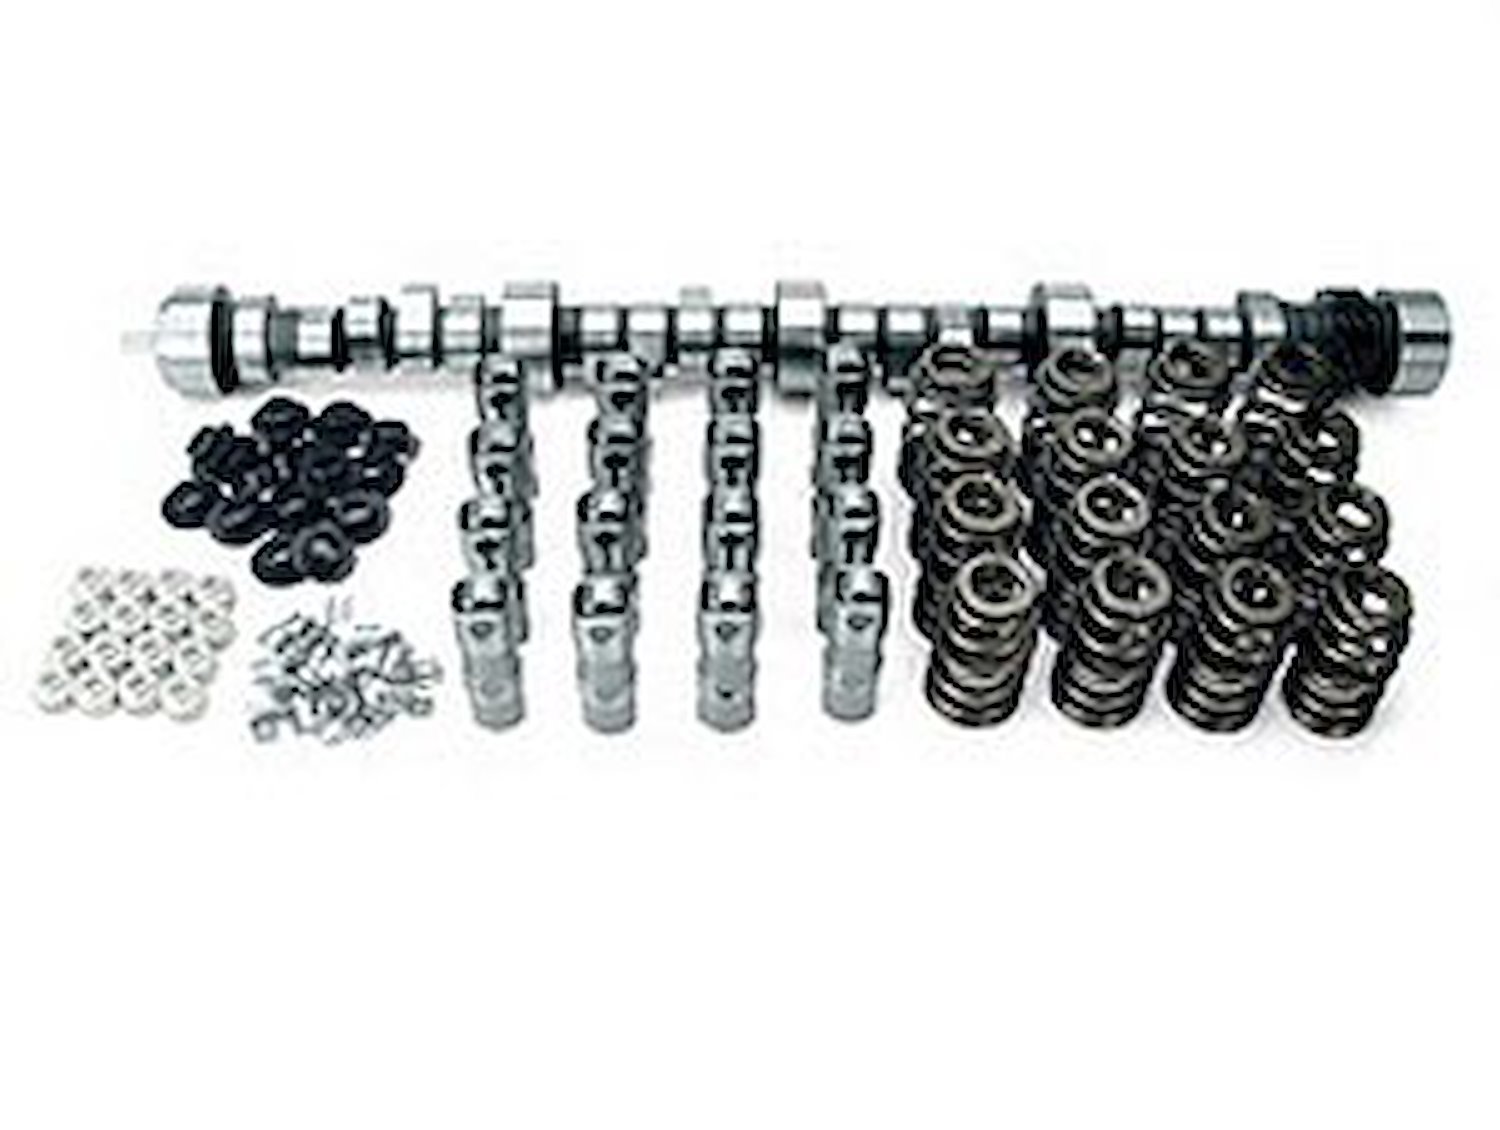 XFI Hydraulic Roller Camshaft Complete Kit Small Block Chevy 305/350 1987-98 Lift: .550"/.546" With 1.6 Rockers